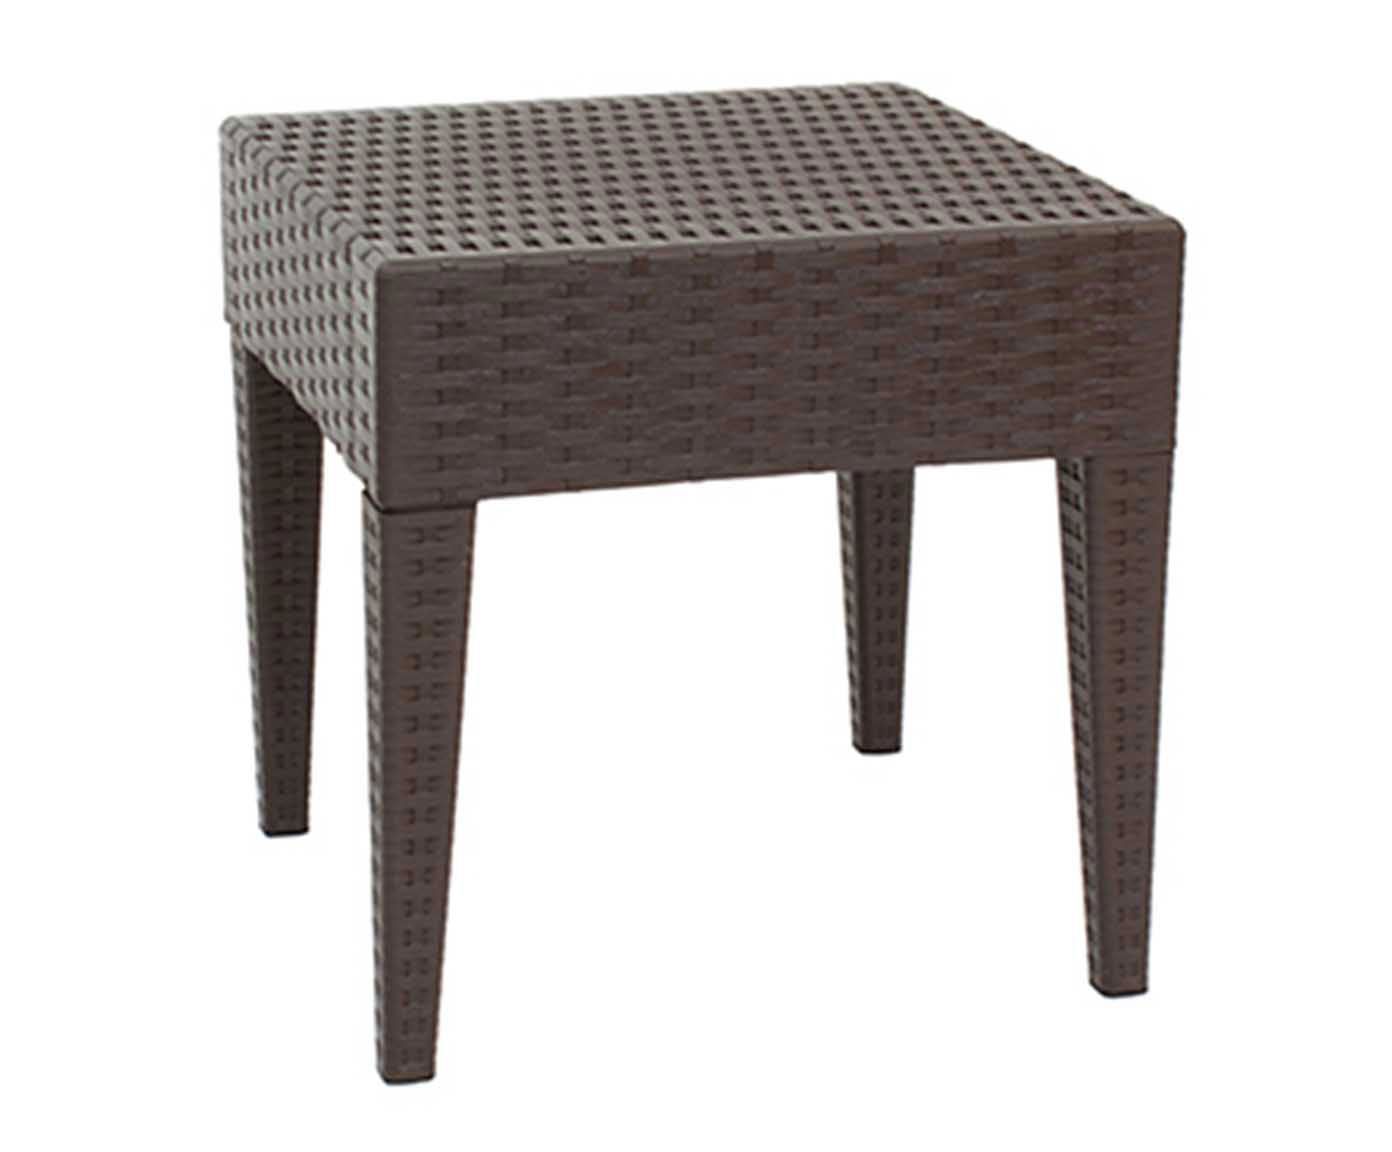 Mesa lateral million - 45 cm | Westwing.com.br